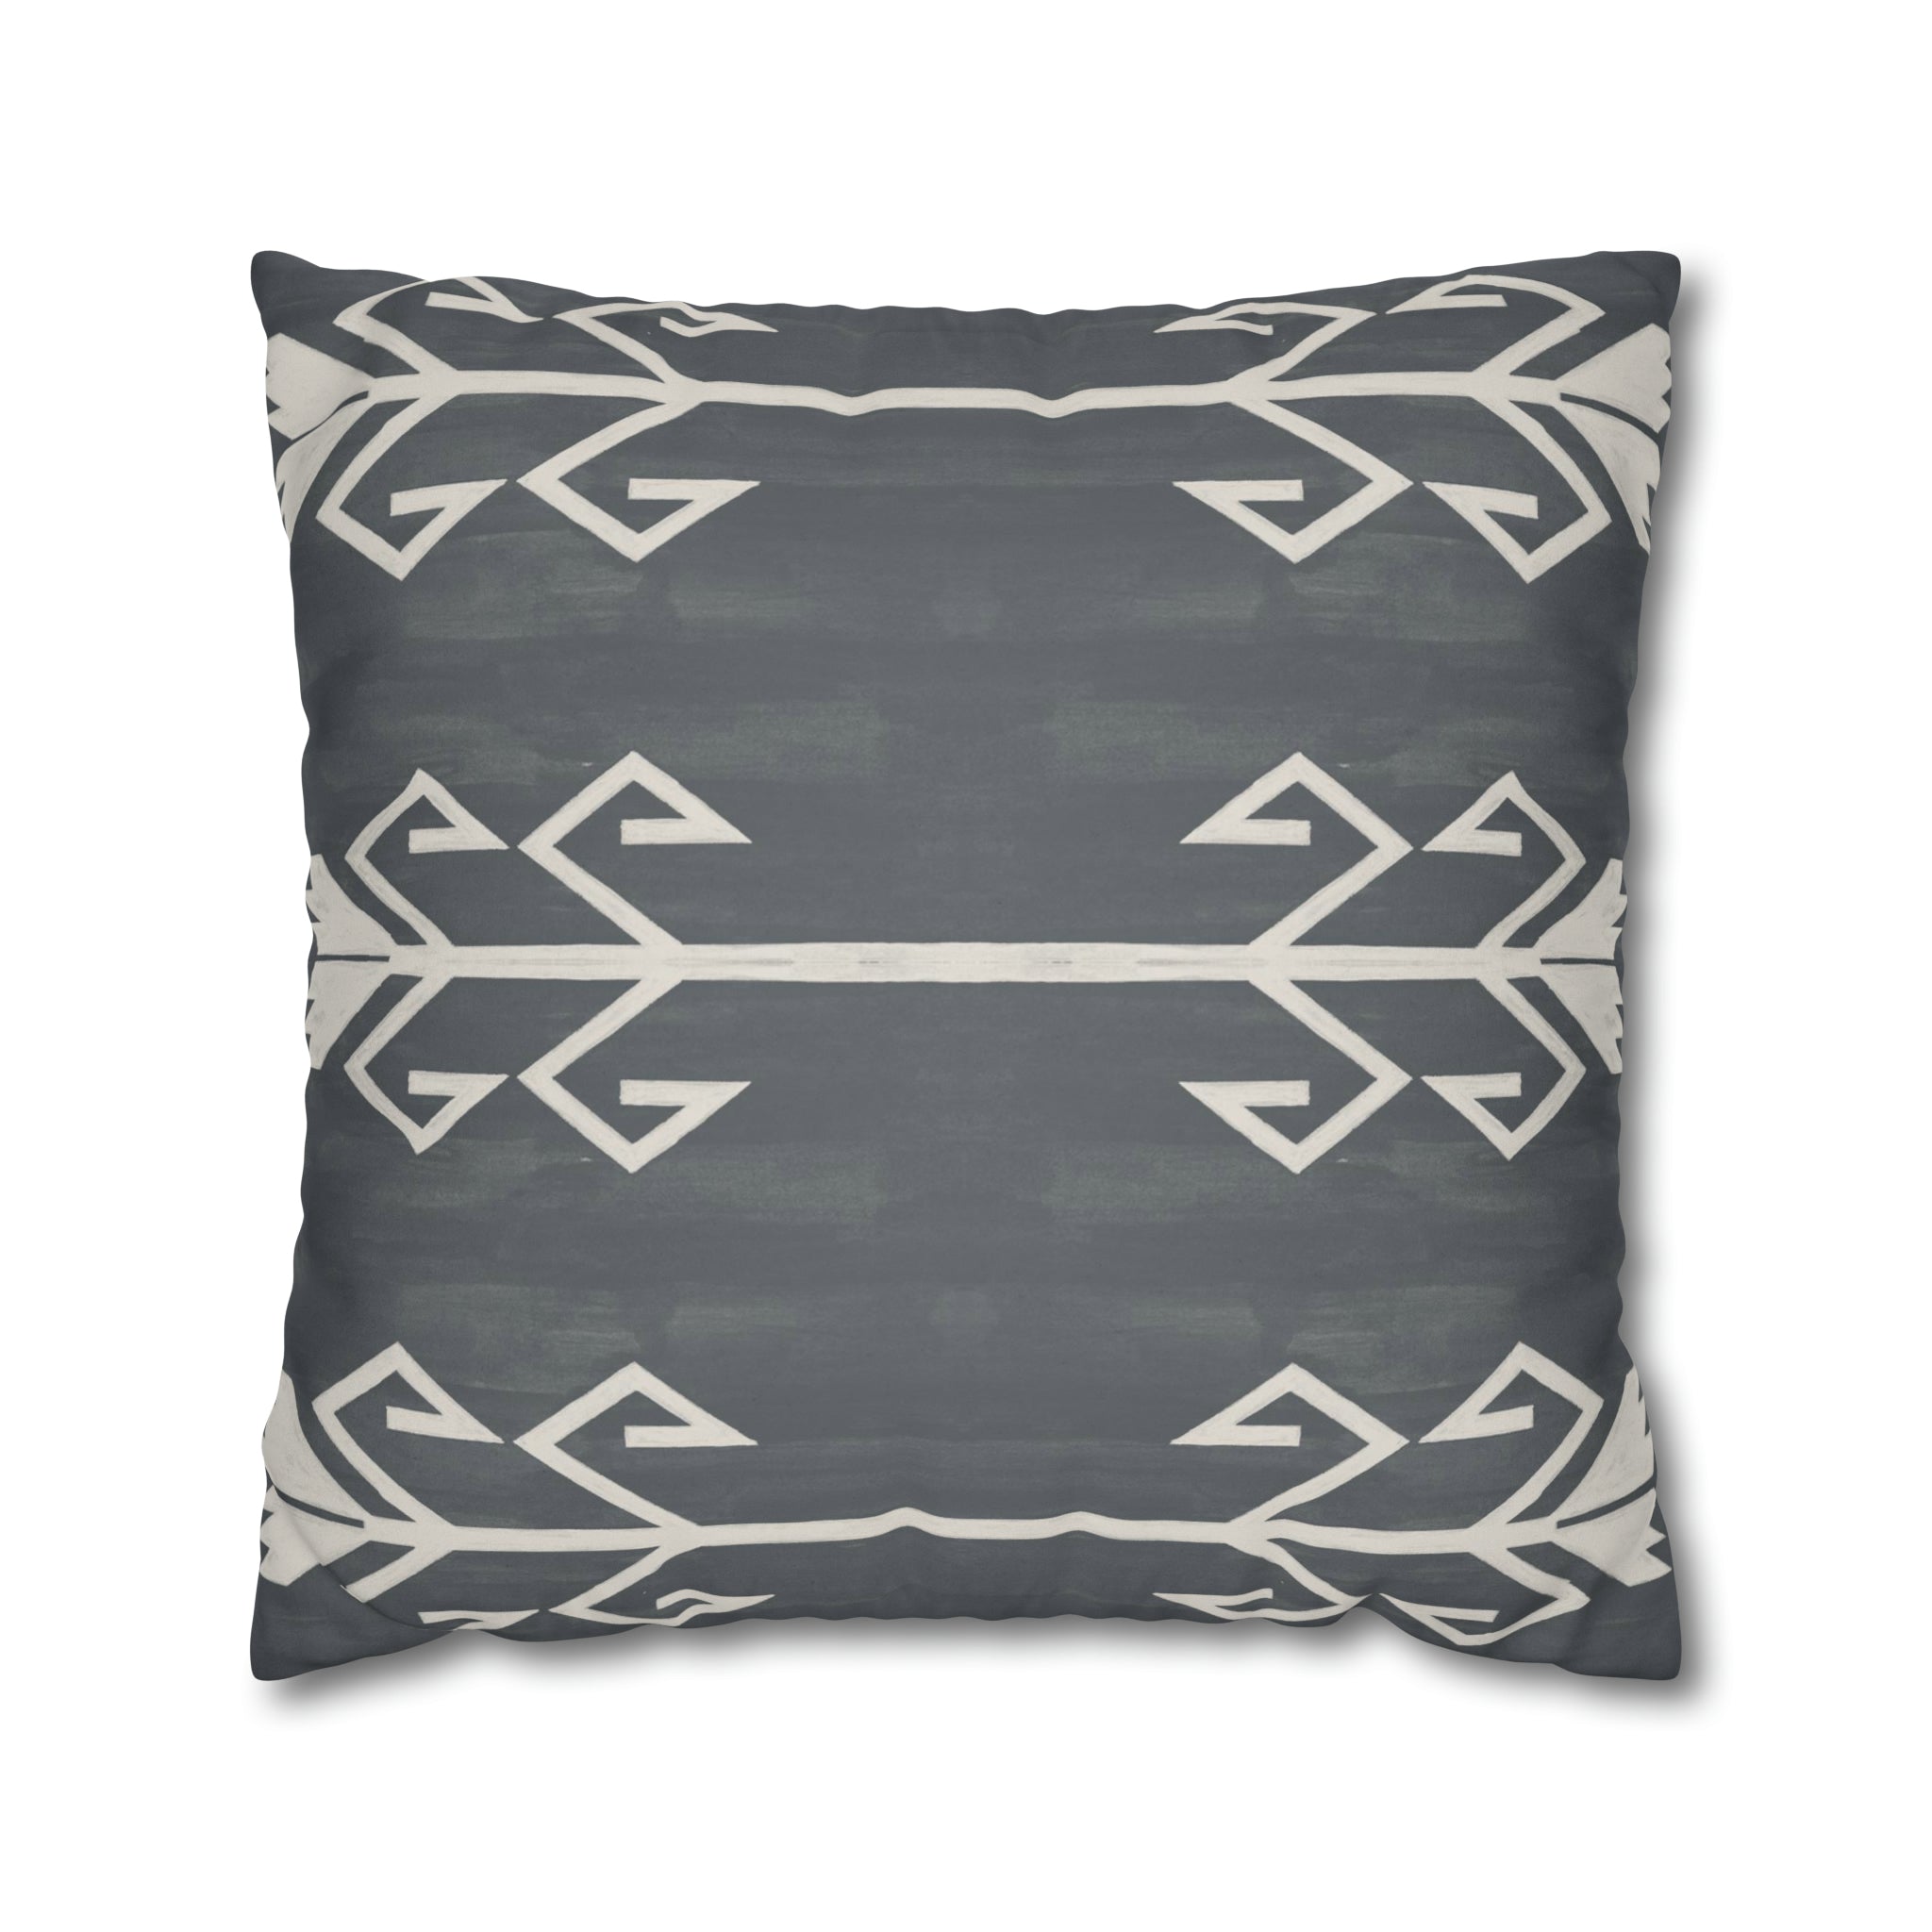 Maricopa Microsuede Square Pillow Cover